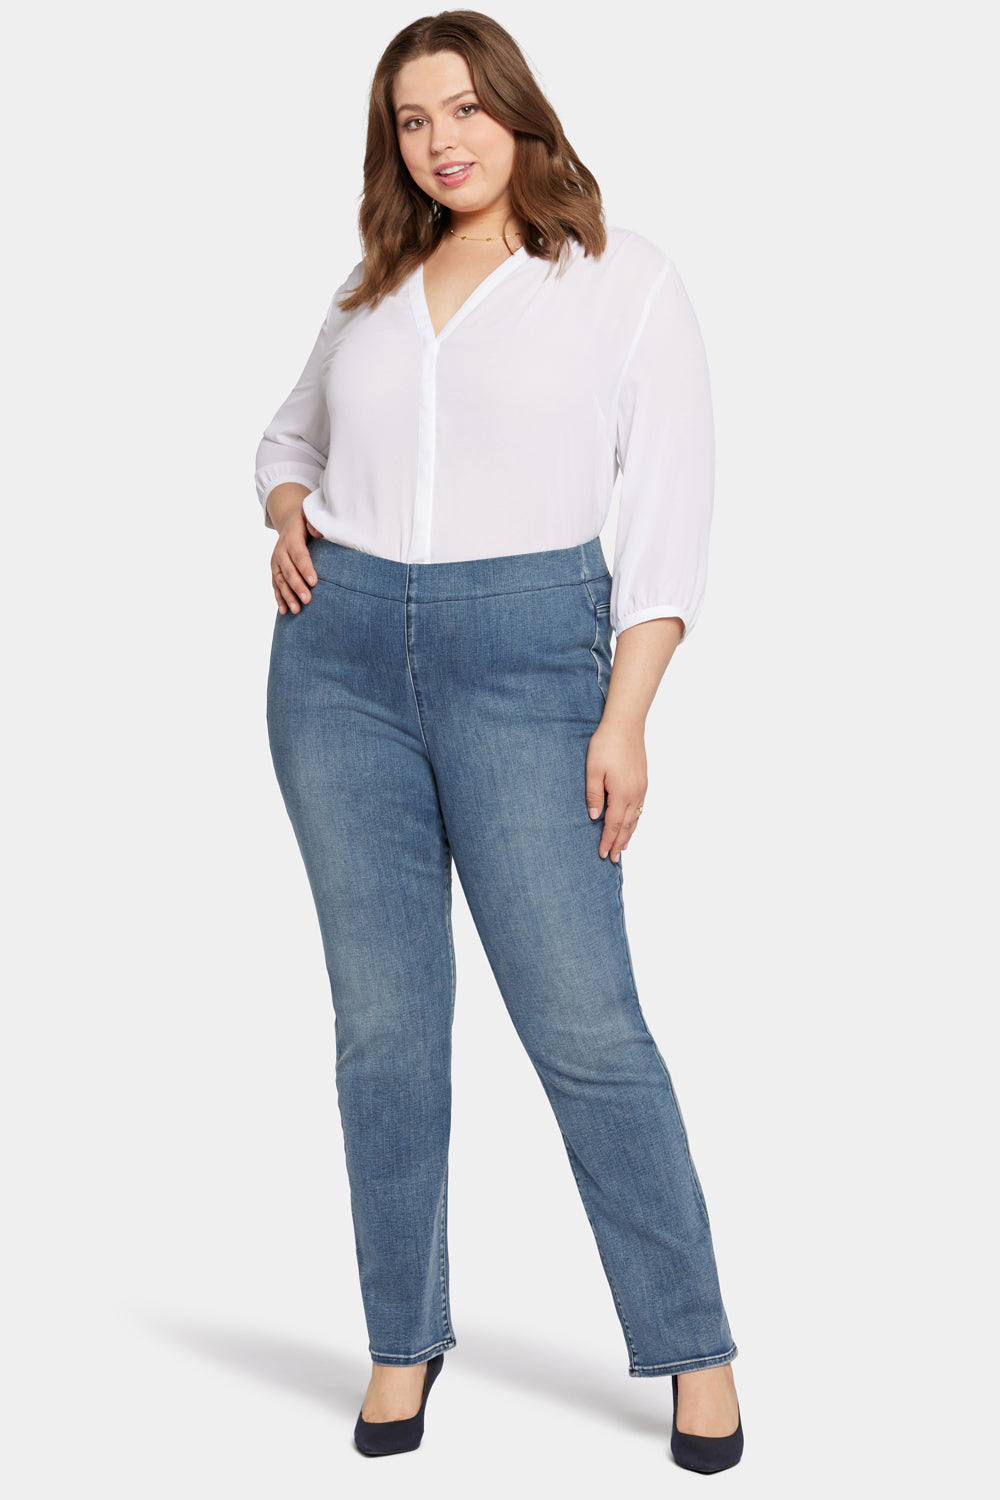 Slim Factor Investments Slim Straight Pull On Jeans Plus Size 1X